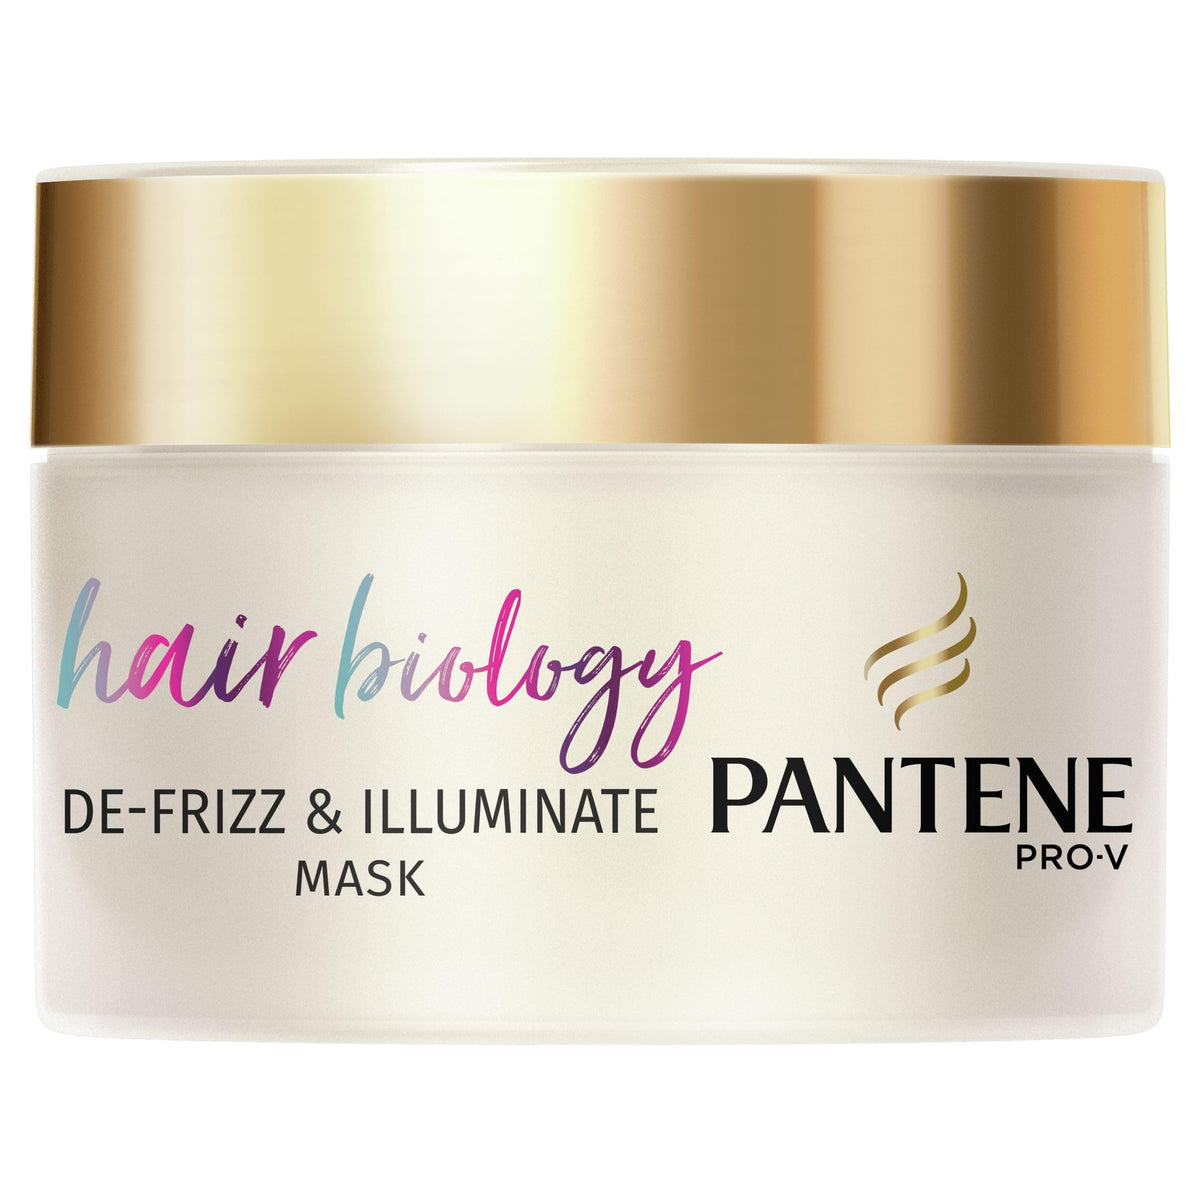 Pantene De-frizz & Illuminate Hair Mask, For Frizzy Or Dry And Coloured Hair, With Hyaluronic Acid, Omega 9 And Pro-V Blend Reconstructing Mask, Helps To Repair Damage, 160 ml